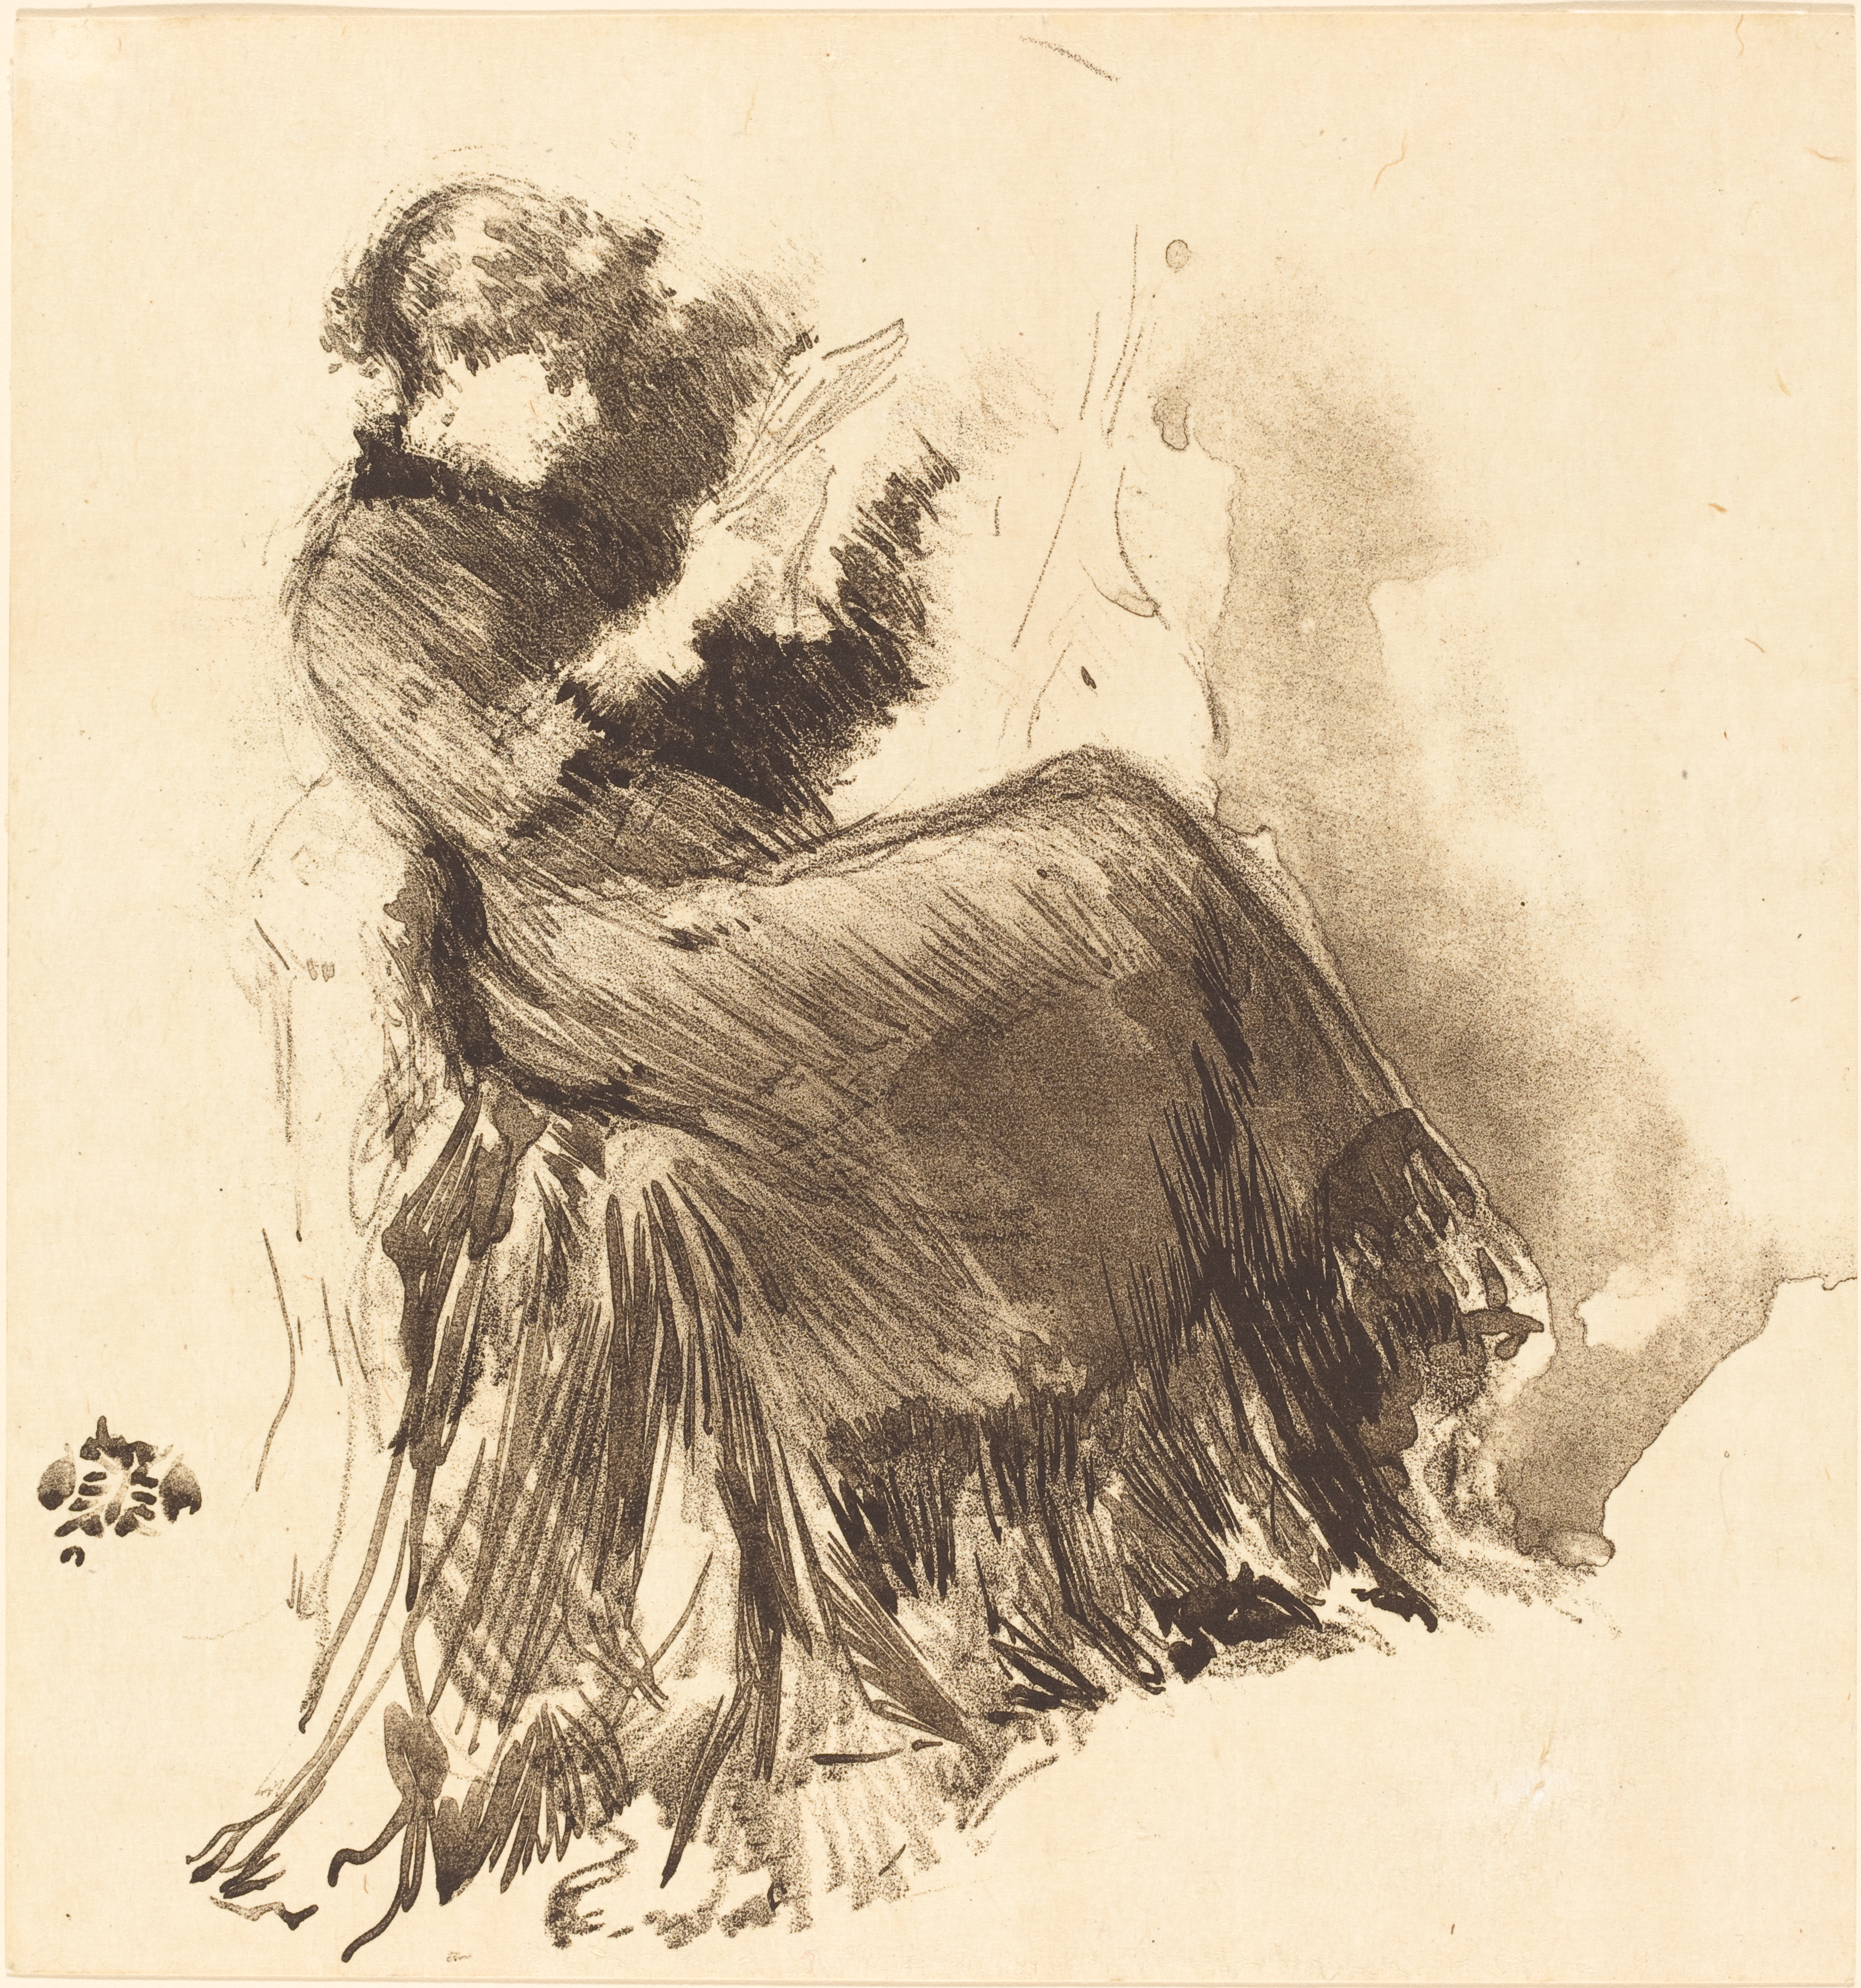 James McNeill Whistler, ‘Study,’ 1878. Lithotint in brown on wove paper, sheet: 25.4 by 23.9cm (10 by 9 7/16in), framed: 55.88 by 40.64cm (22 by 16in). National Gallery of Art, Washington, Rosenwald Collection 